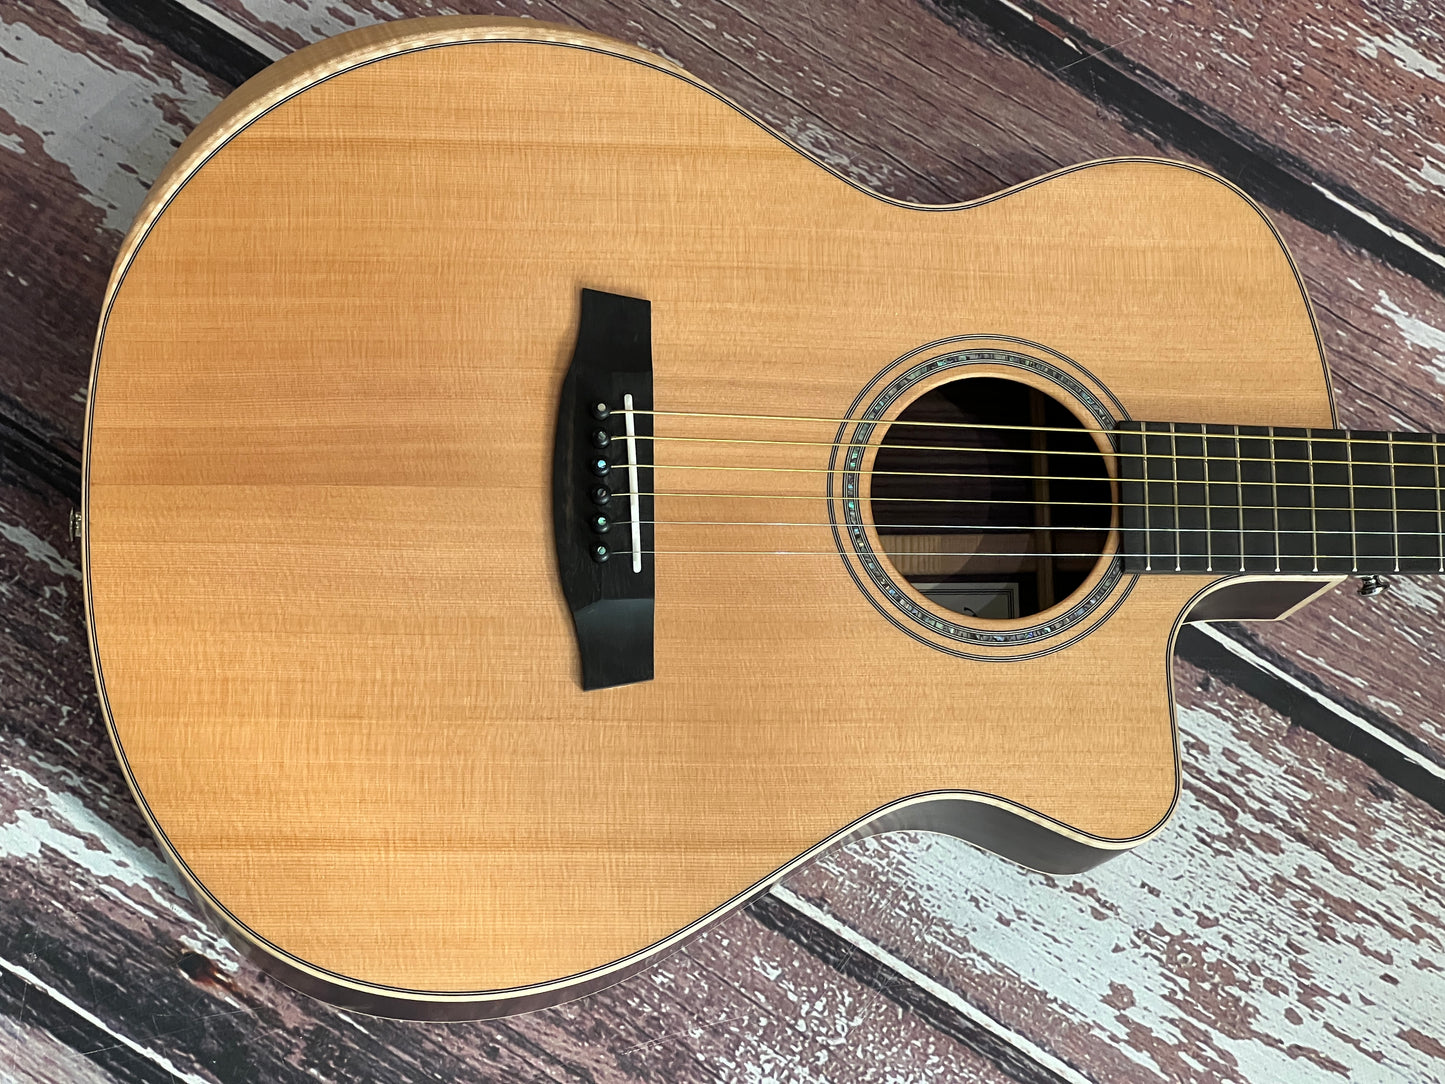 Walden G3030 RCE Electro Acoustic with Hard case 44mm nut